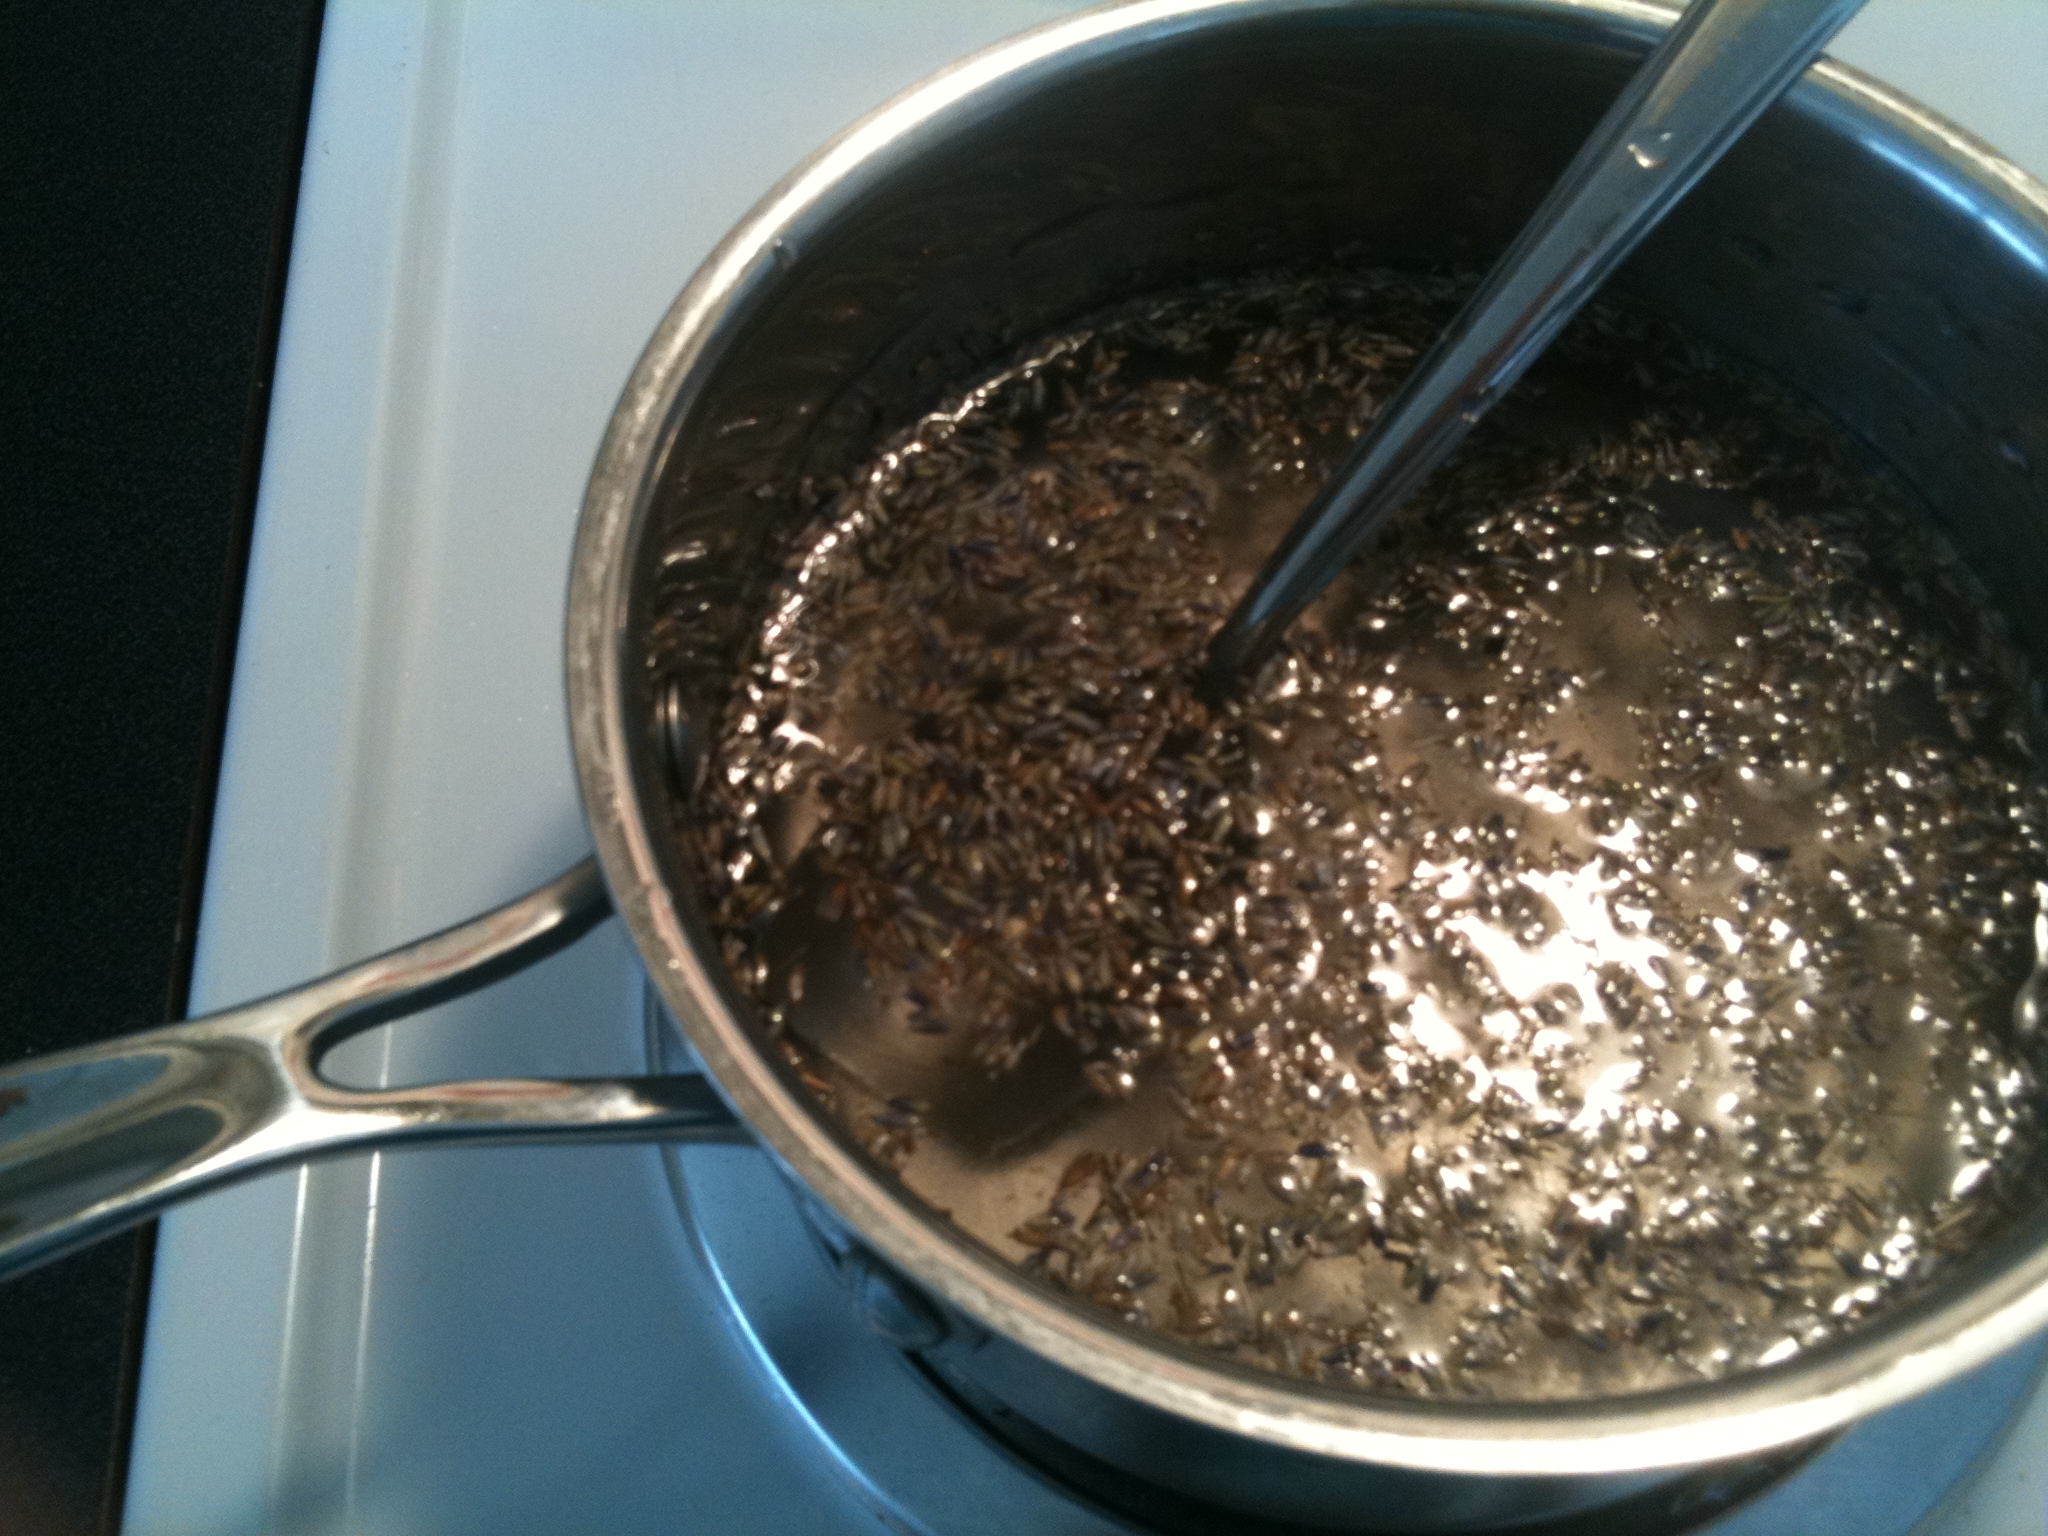 Lavender sugar syrup on the stove